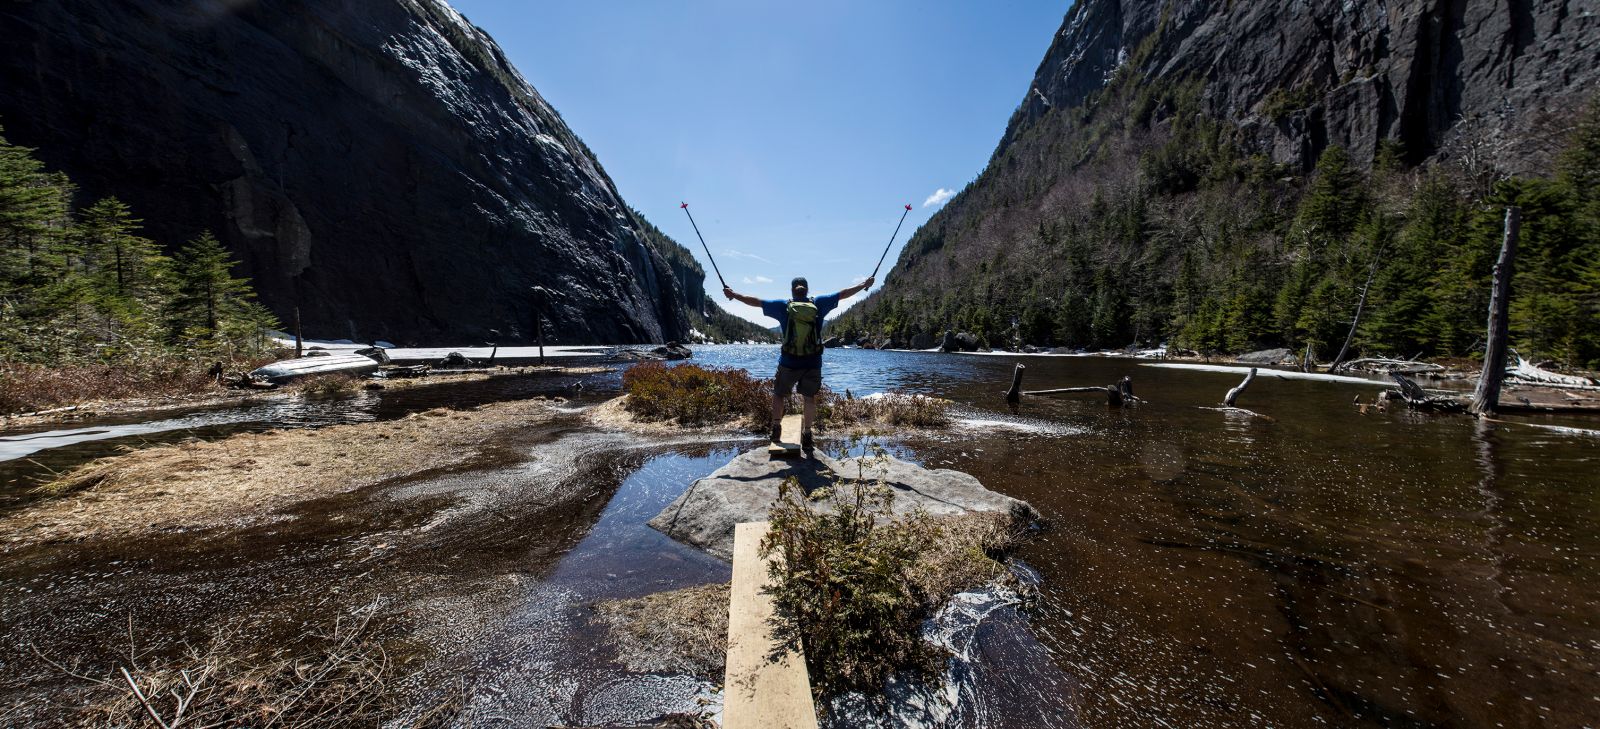 A man posing on the shore of Avalanche Lake while spring hiking in the Adirondacks.